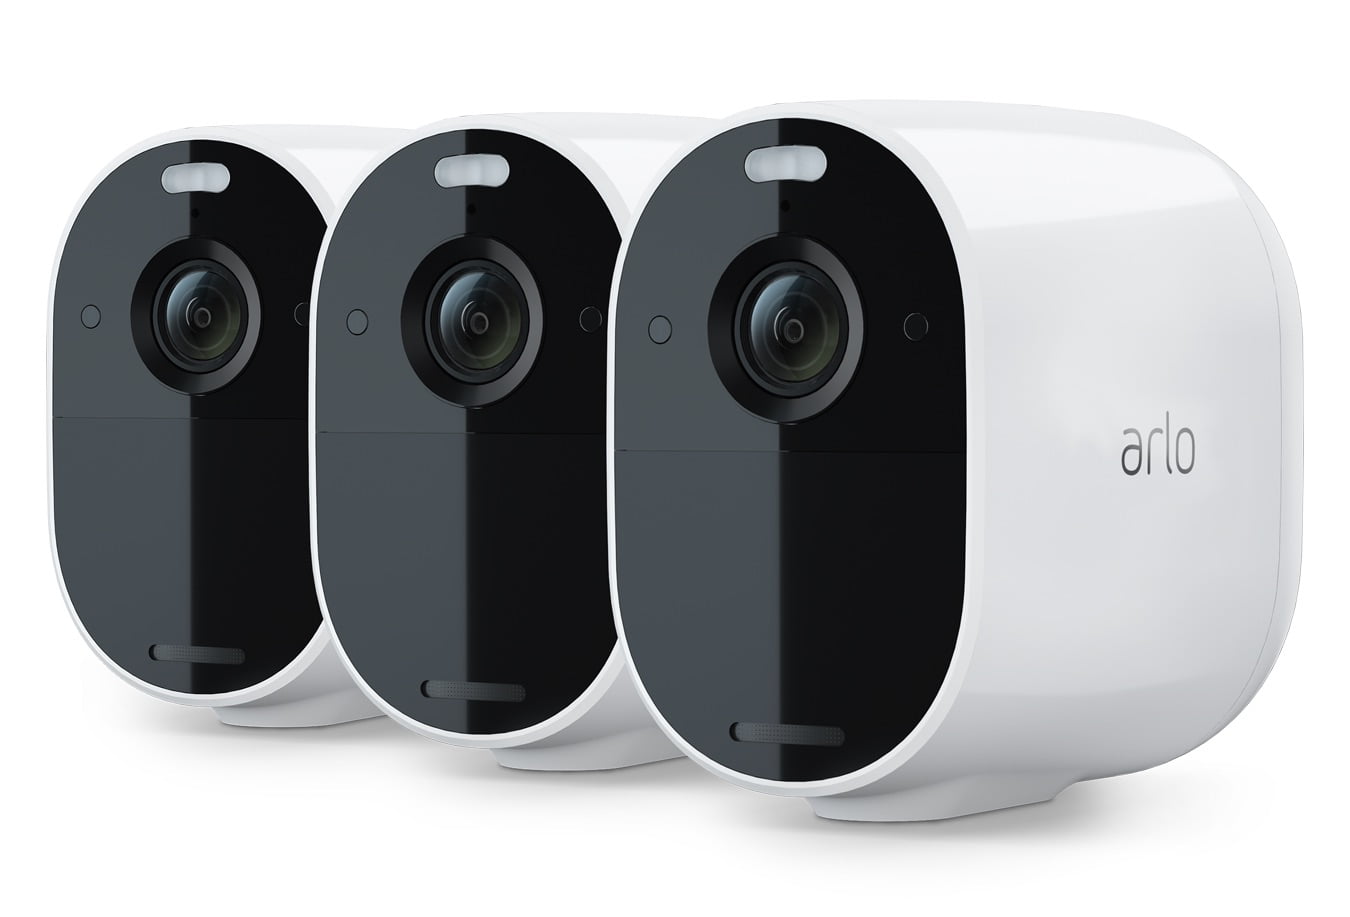 3-Count Arlo Essential Spotlight Wifi Security Camera w/ 1080p Video (White) $129 ($43 Each) + Free Shipping